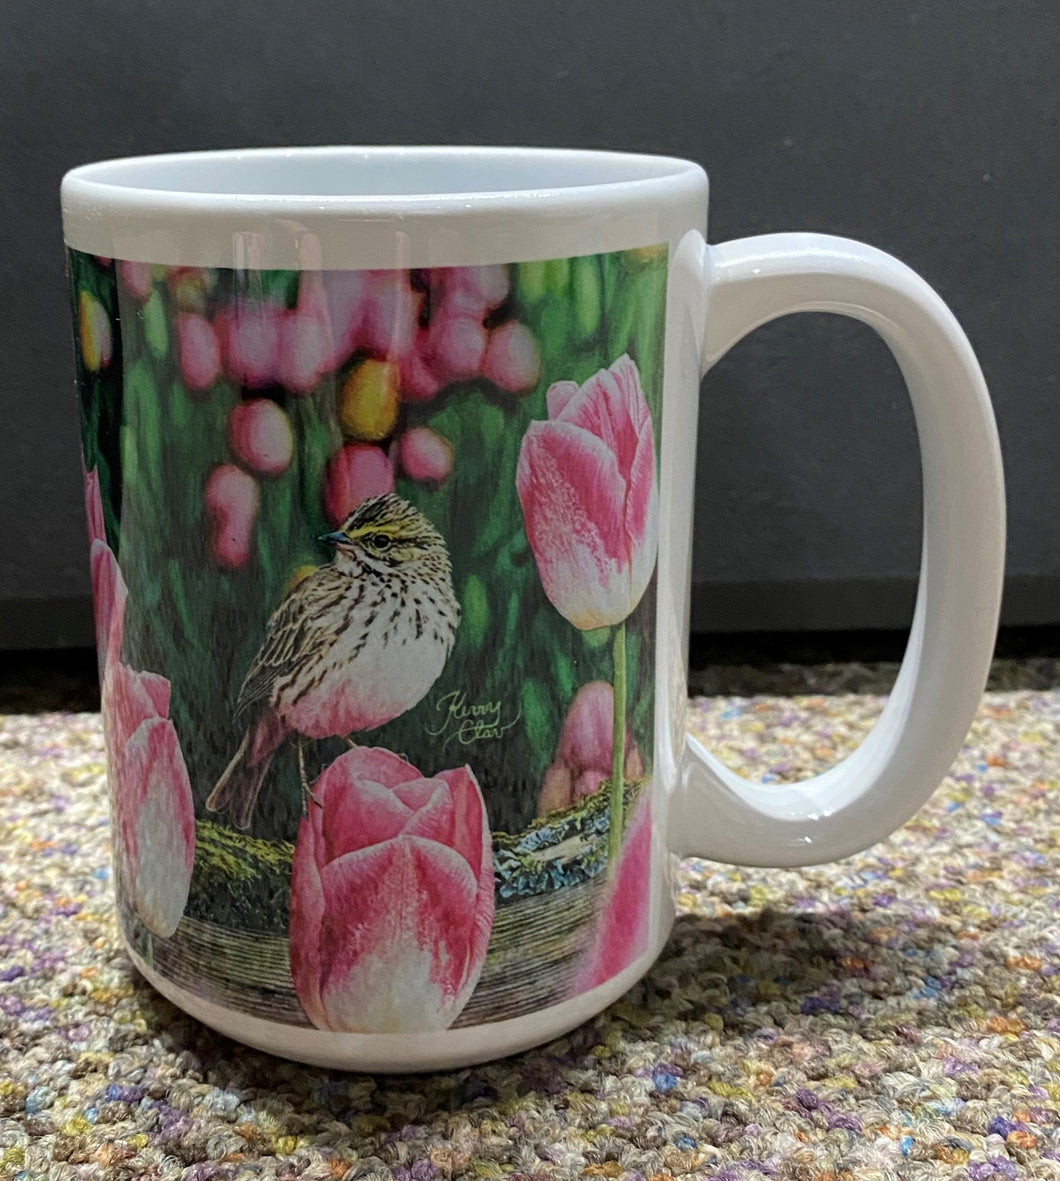 15 ounce Ceramic Coffee Mugs with various poster images